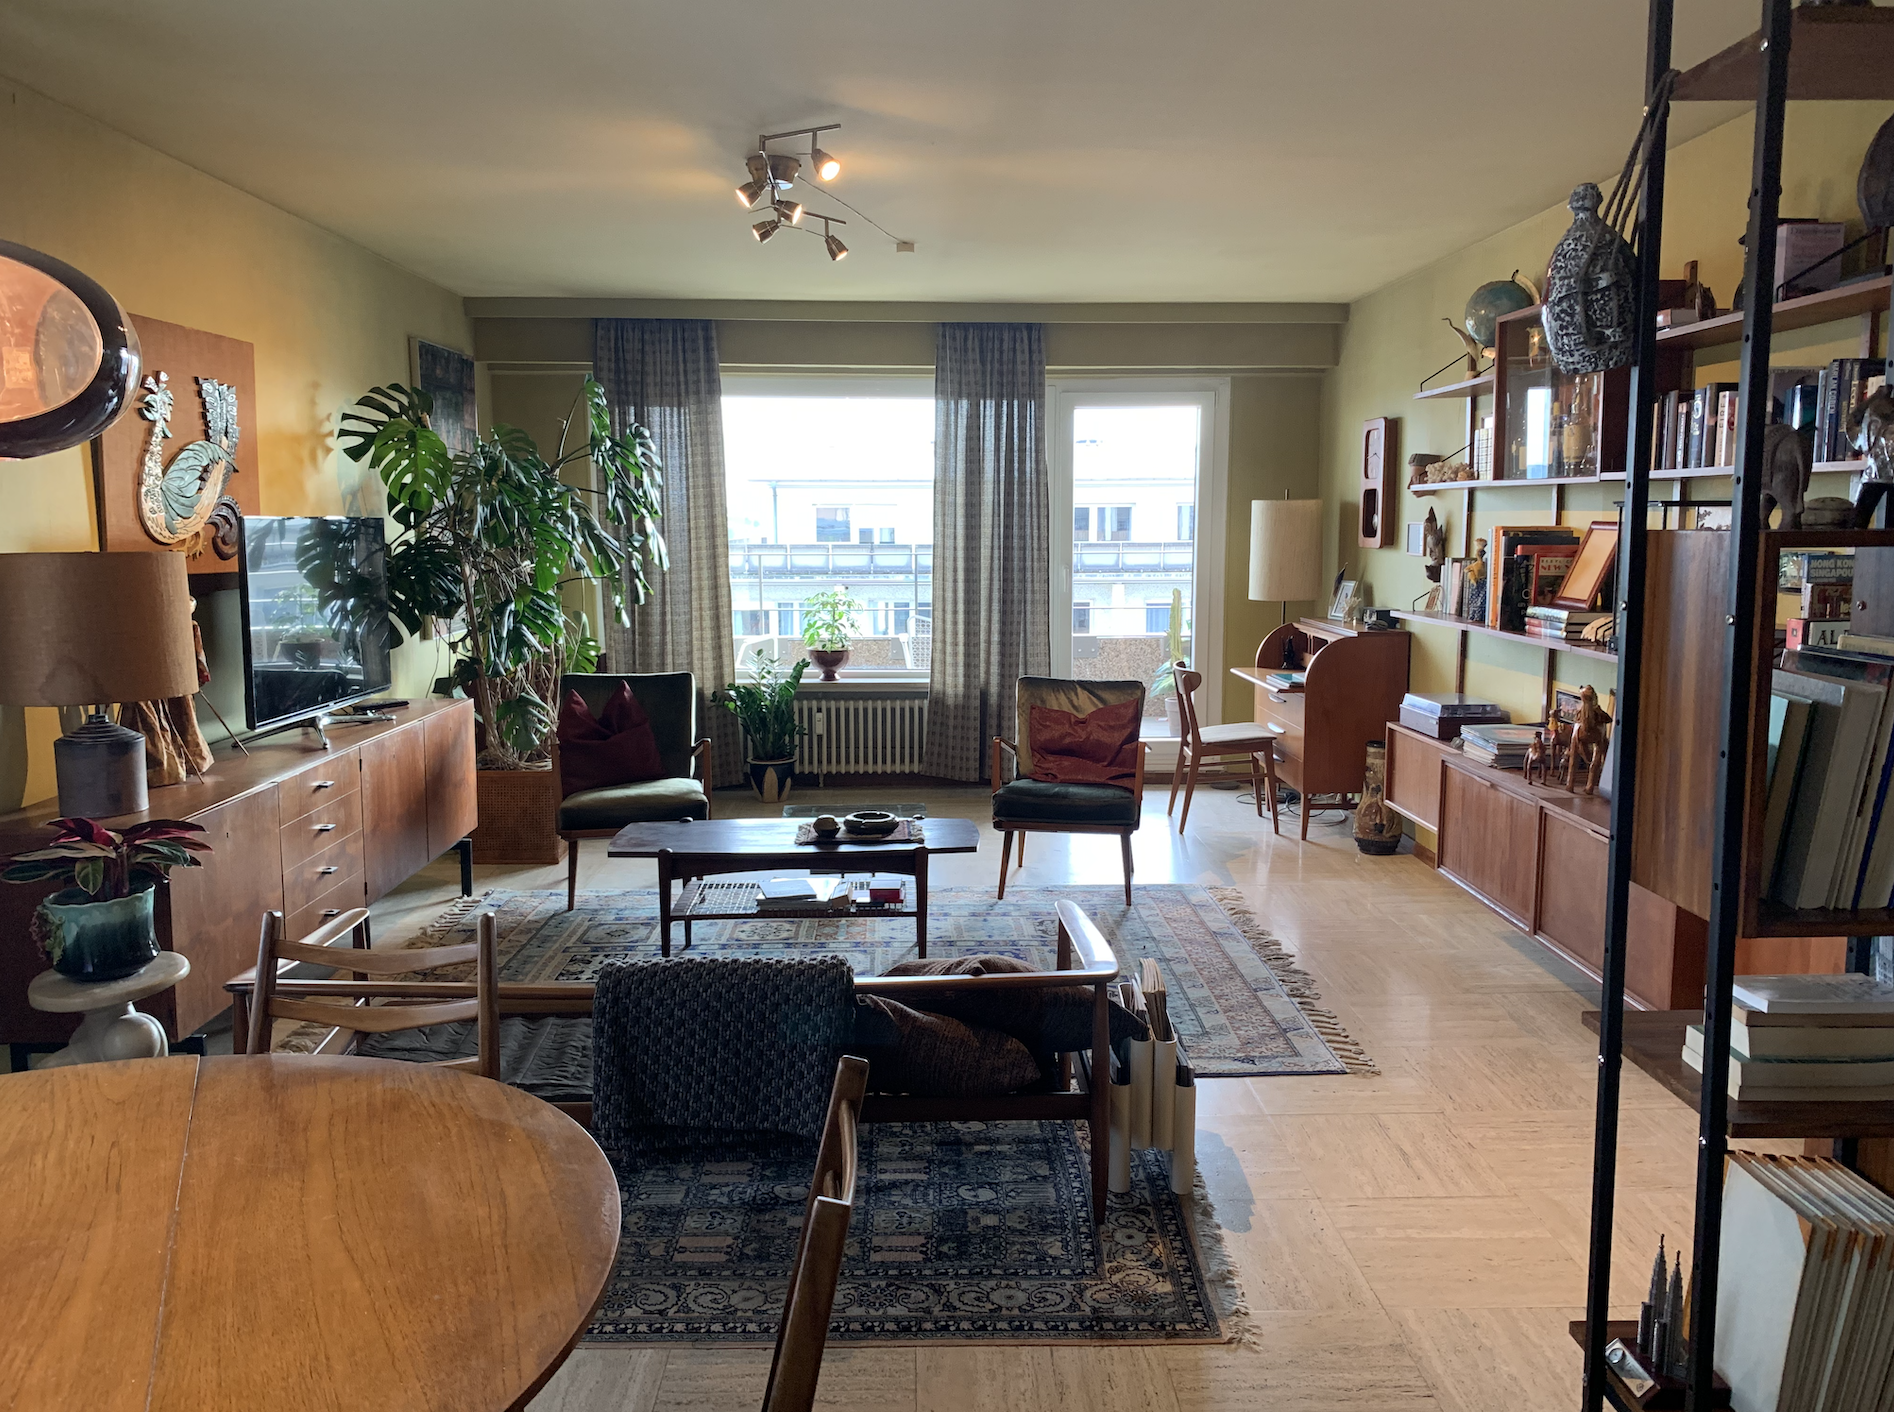 Interior of the apartment in 60s style